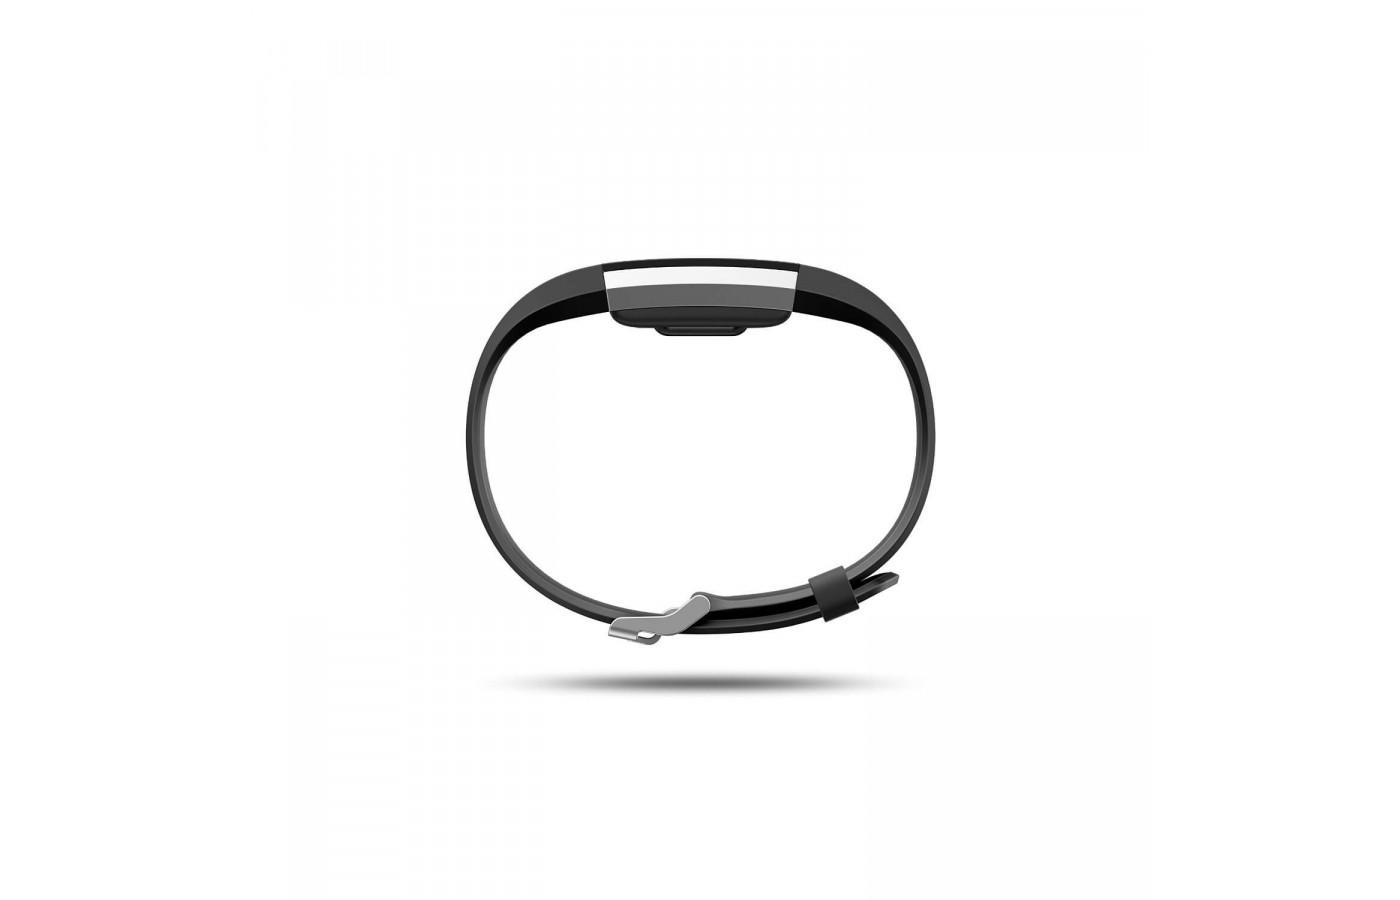 Fitbit Charge 2 bands are interchangeable